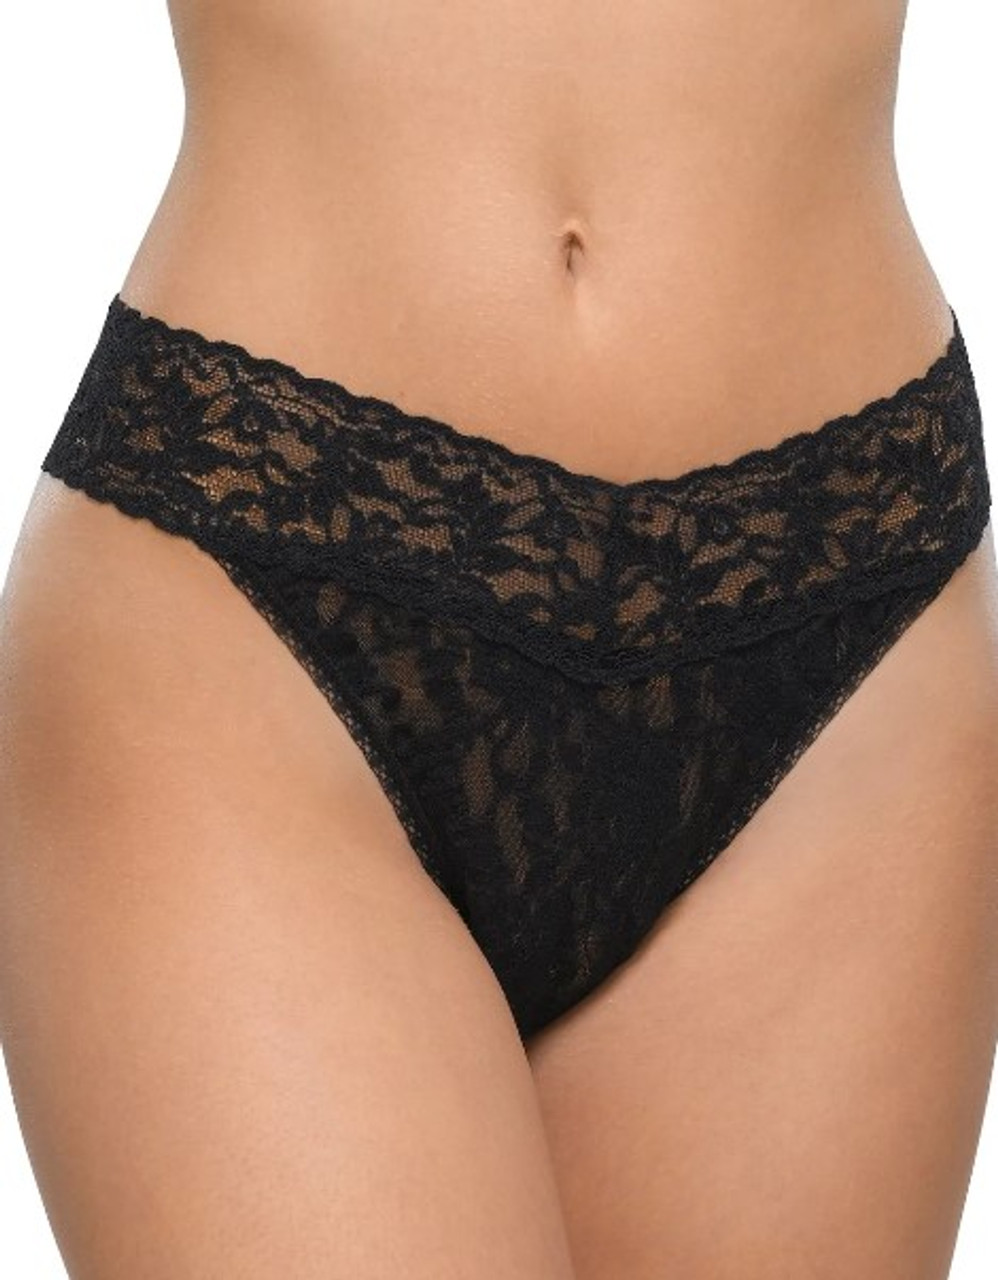 Hanky Panky Products - Ella Coco Lingerie